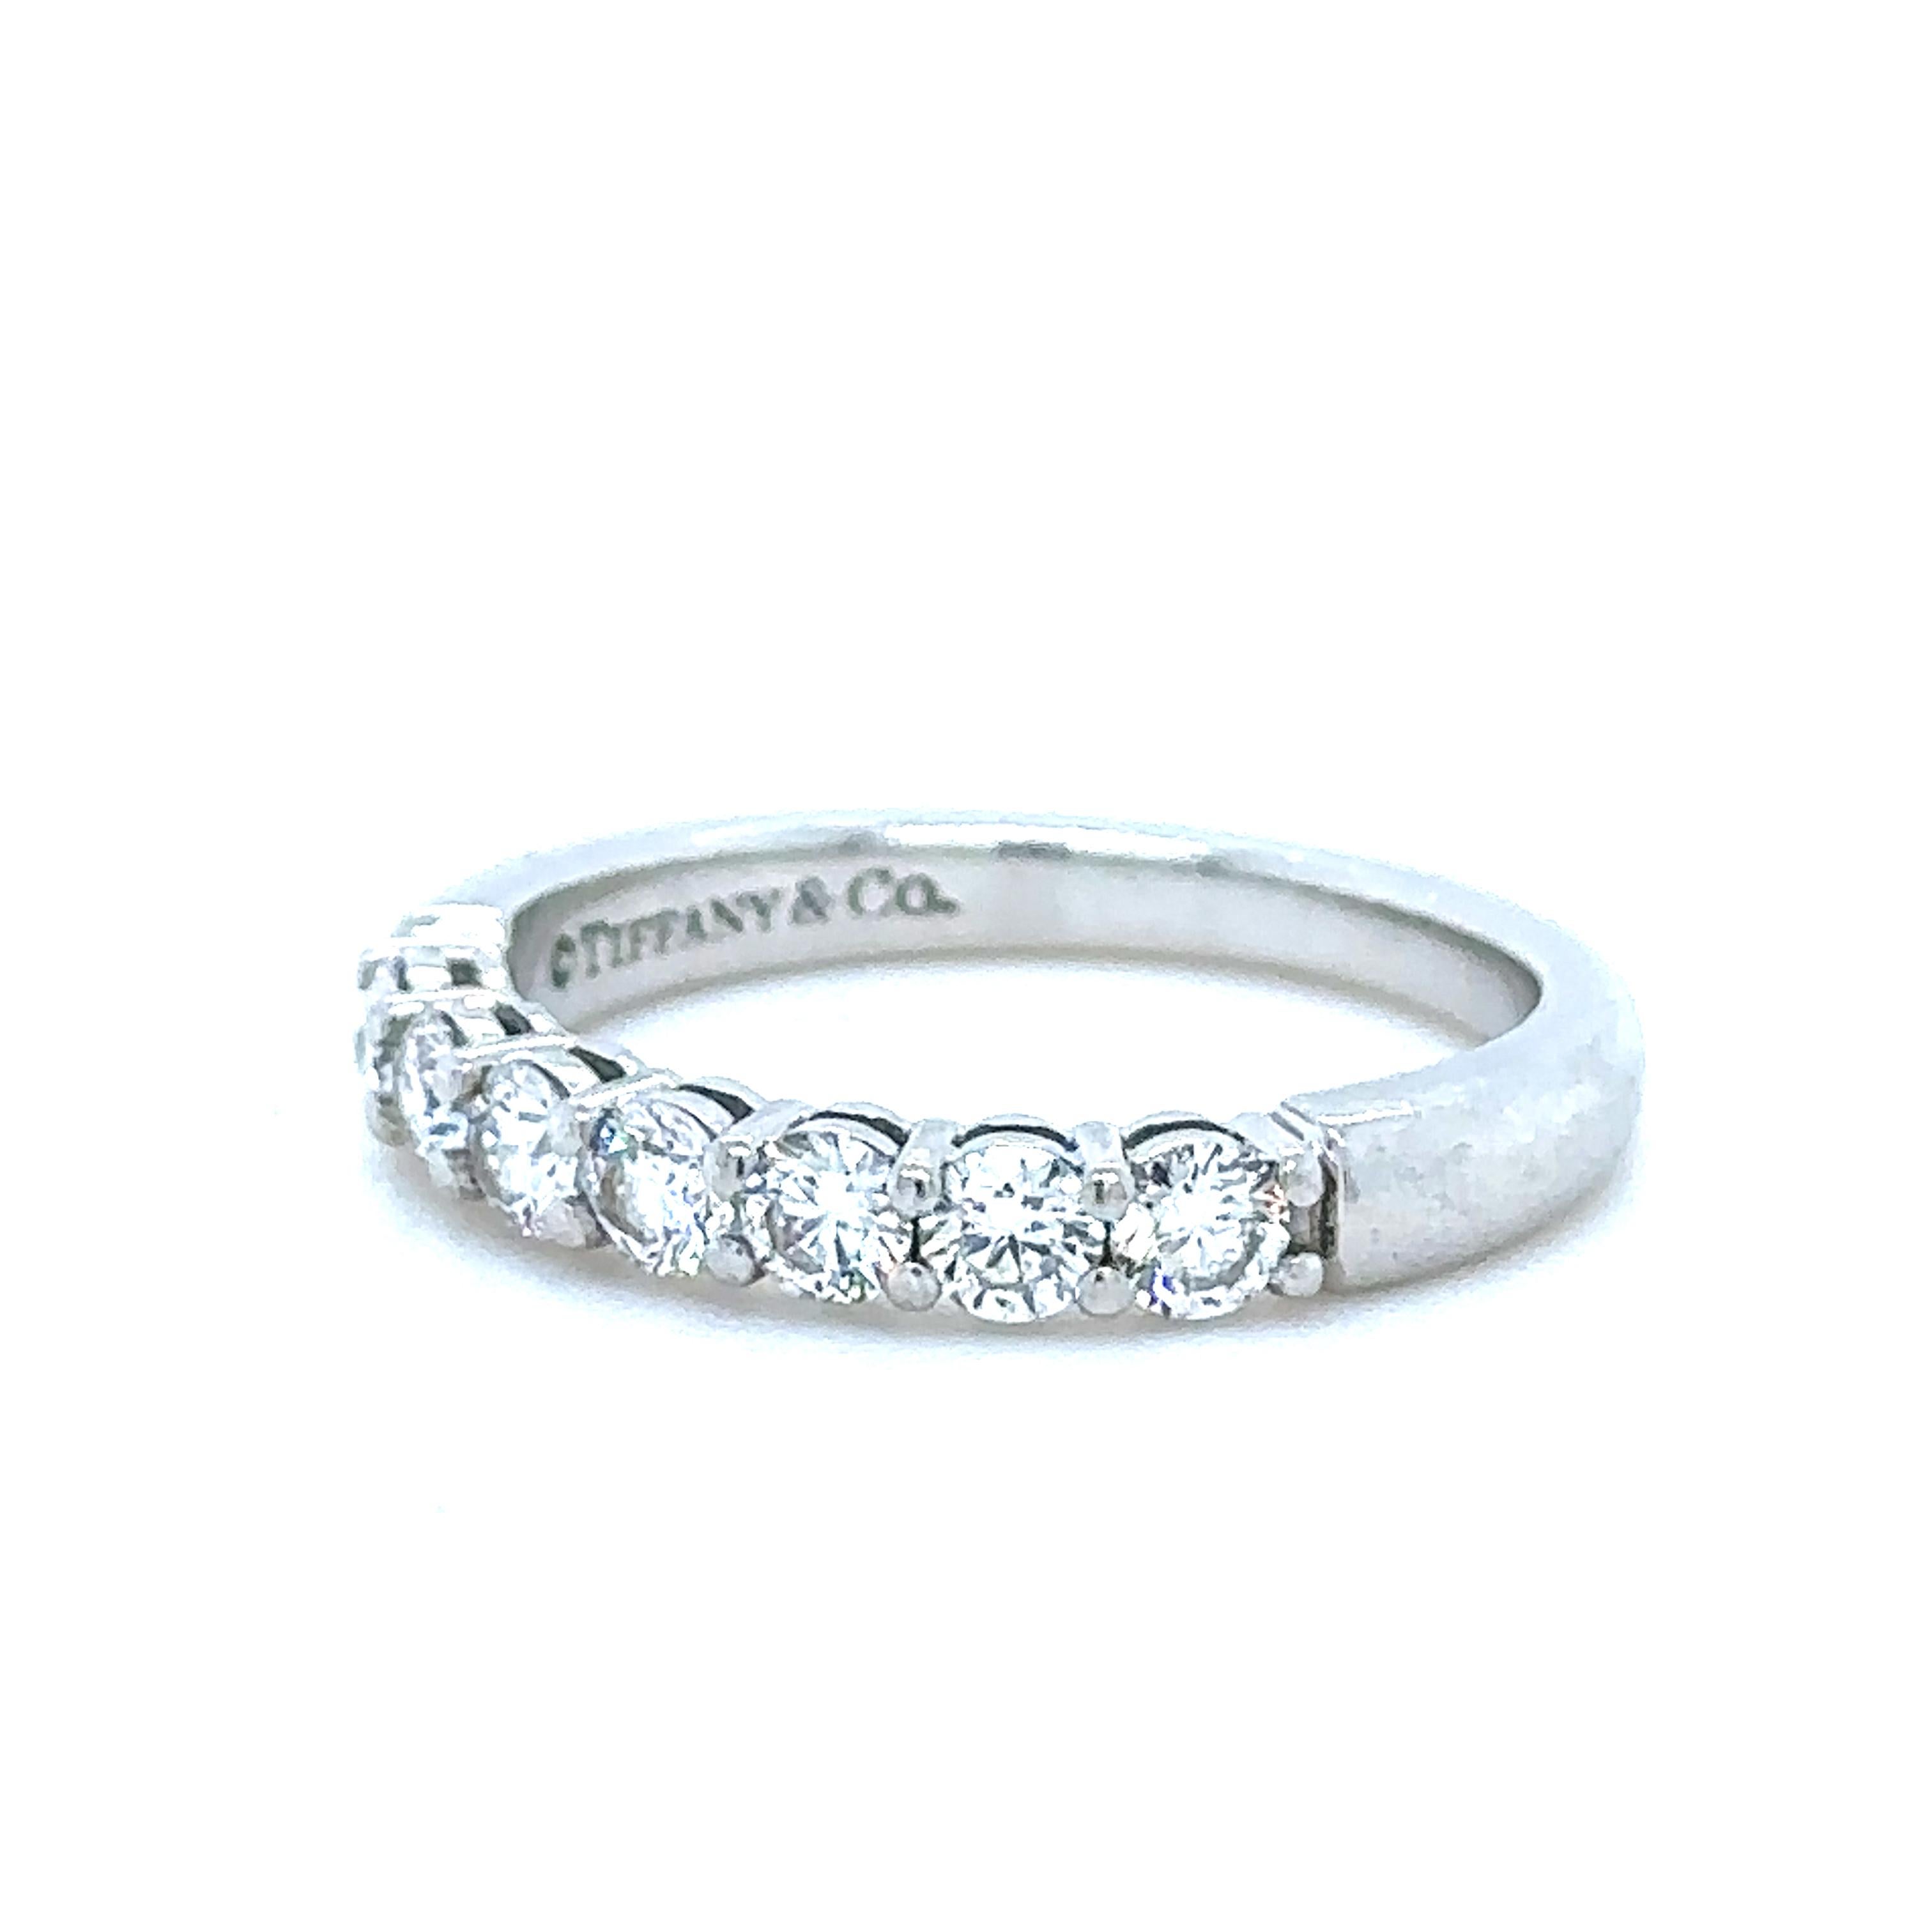 Unique features:

A Tiffany & Co Diamond Eternity Ring, made of 950 Platinum, ring size of L1/2, and weighing 4.8 gm.

Set with 7 round, brilliant cut Diamonds, approximately colour F and clarity VS with a total weight of 0.60 ct.

Metal: Platinum